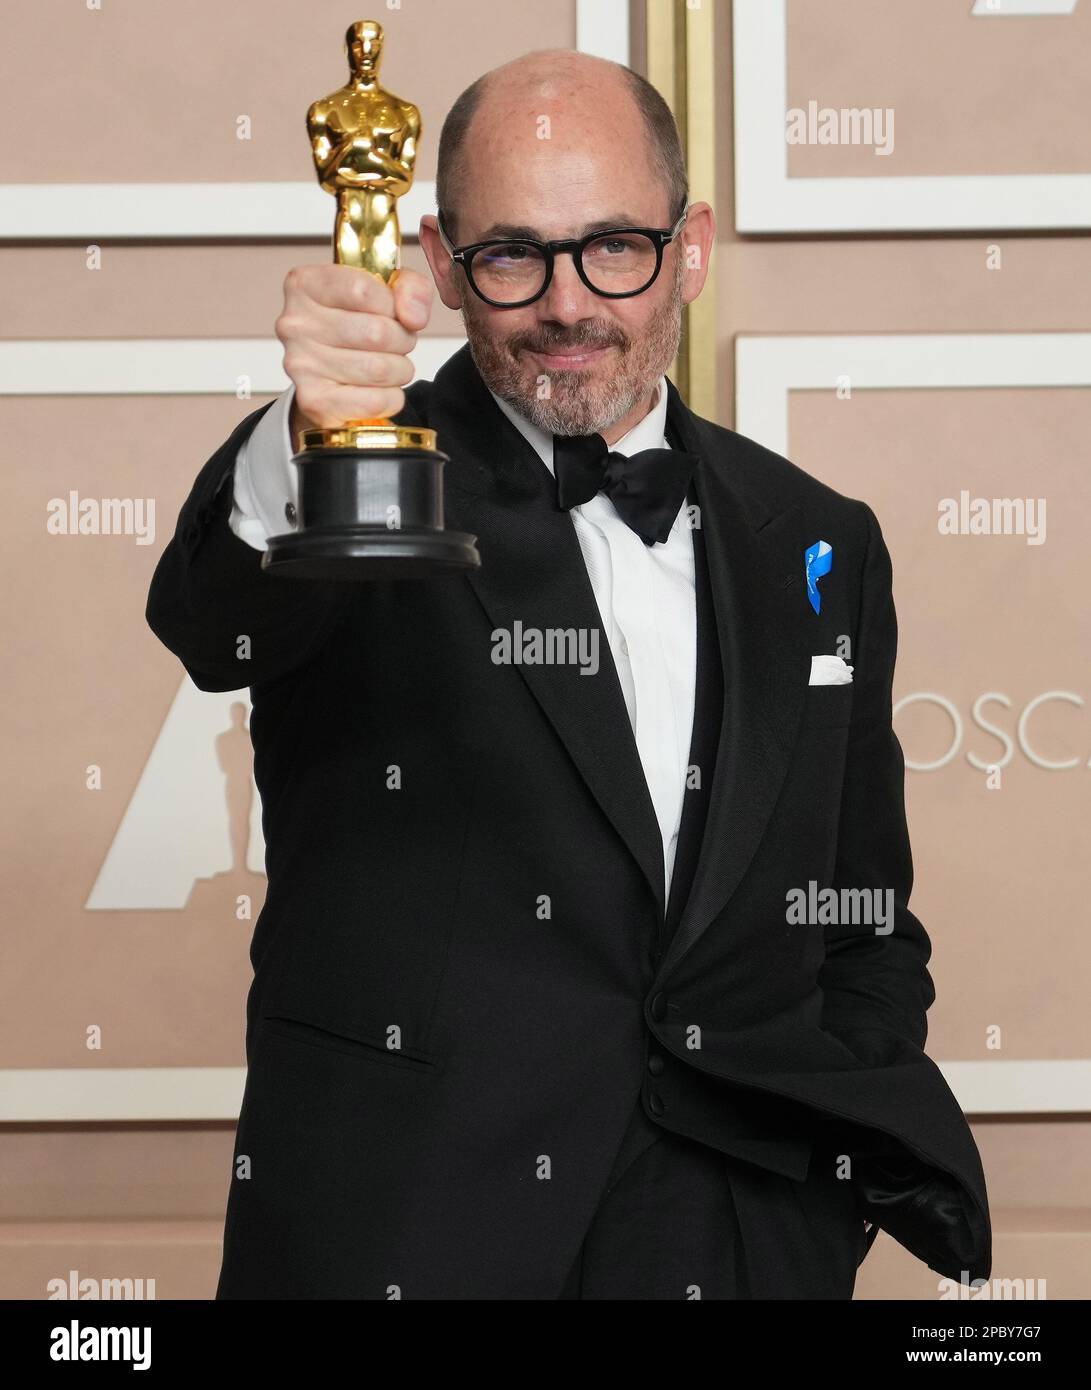 Los Angeles, USA. 12th Mar, 2023. Edward Berger, winner of the Best International Feature Film award for ‘All Quiet on the Western Front' posing for photos in the press room at the The 95th Academy Awards held by the Academy of Motion Picture Arts and Sciences at the Dolby Theatre in Los Angeles, CA on March 12, 2023. (Photo by Sthanlee B. Mirador/Sipa USA) Credit: Sipa USA/Alamy Live News Stock Photo